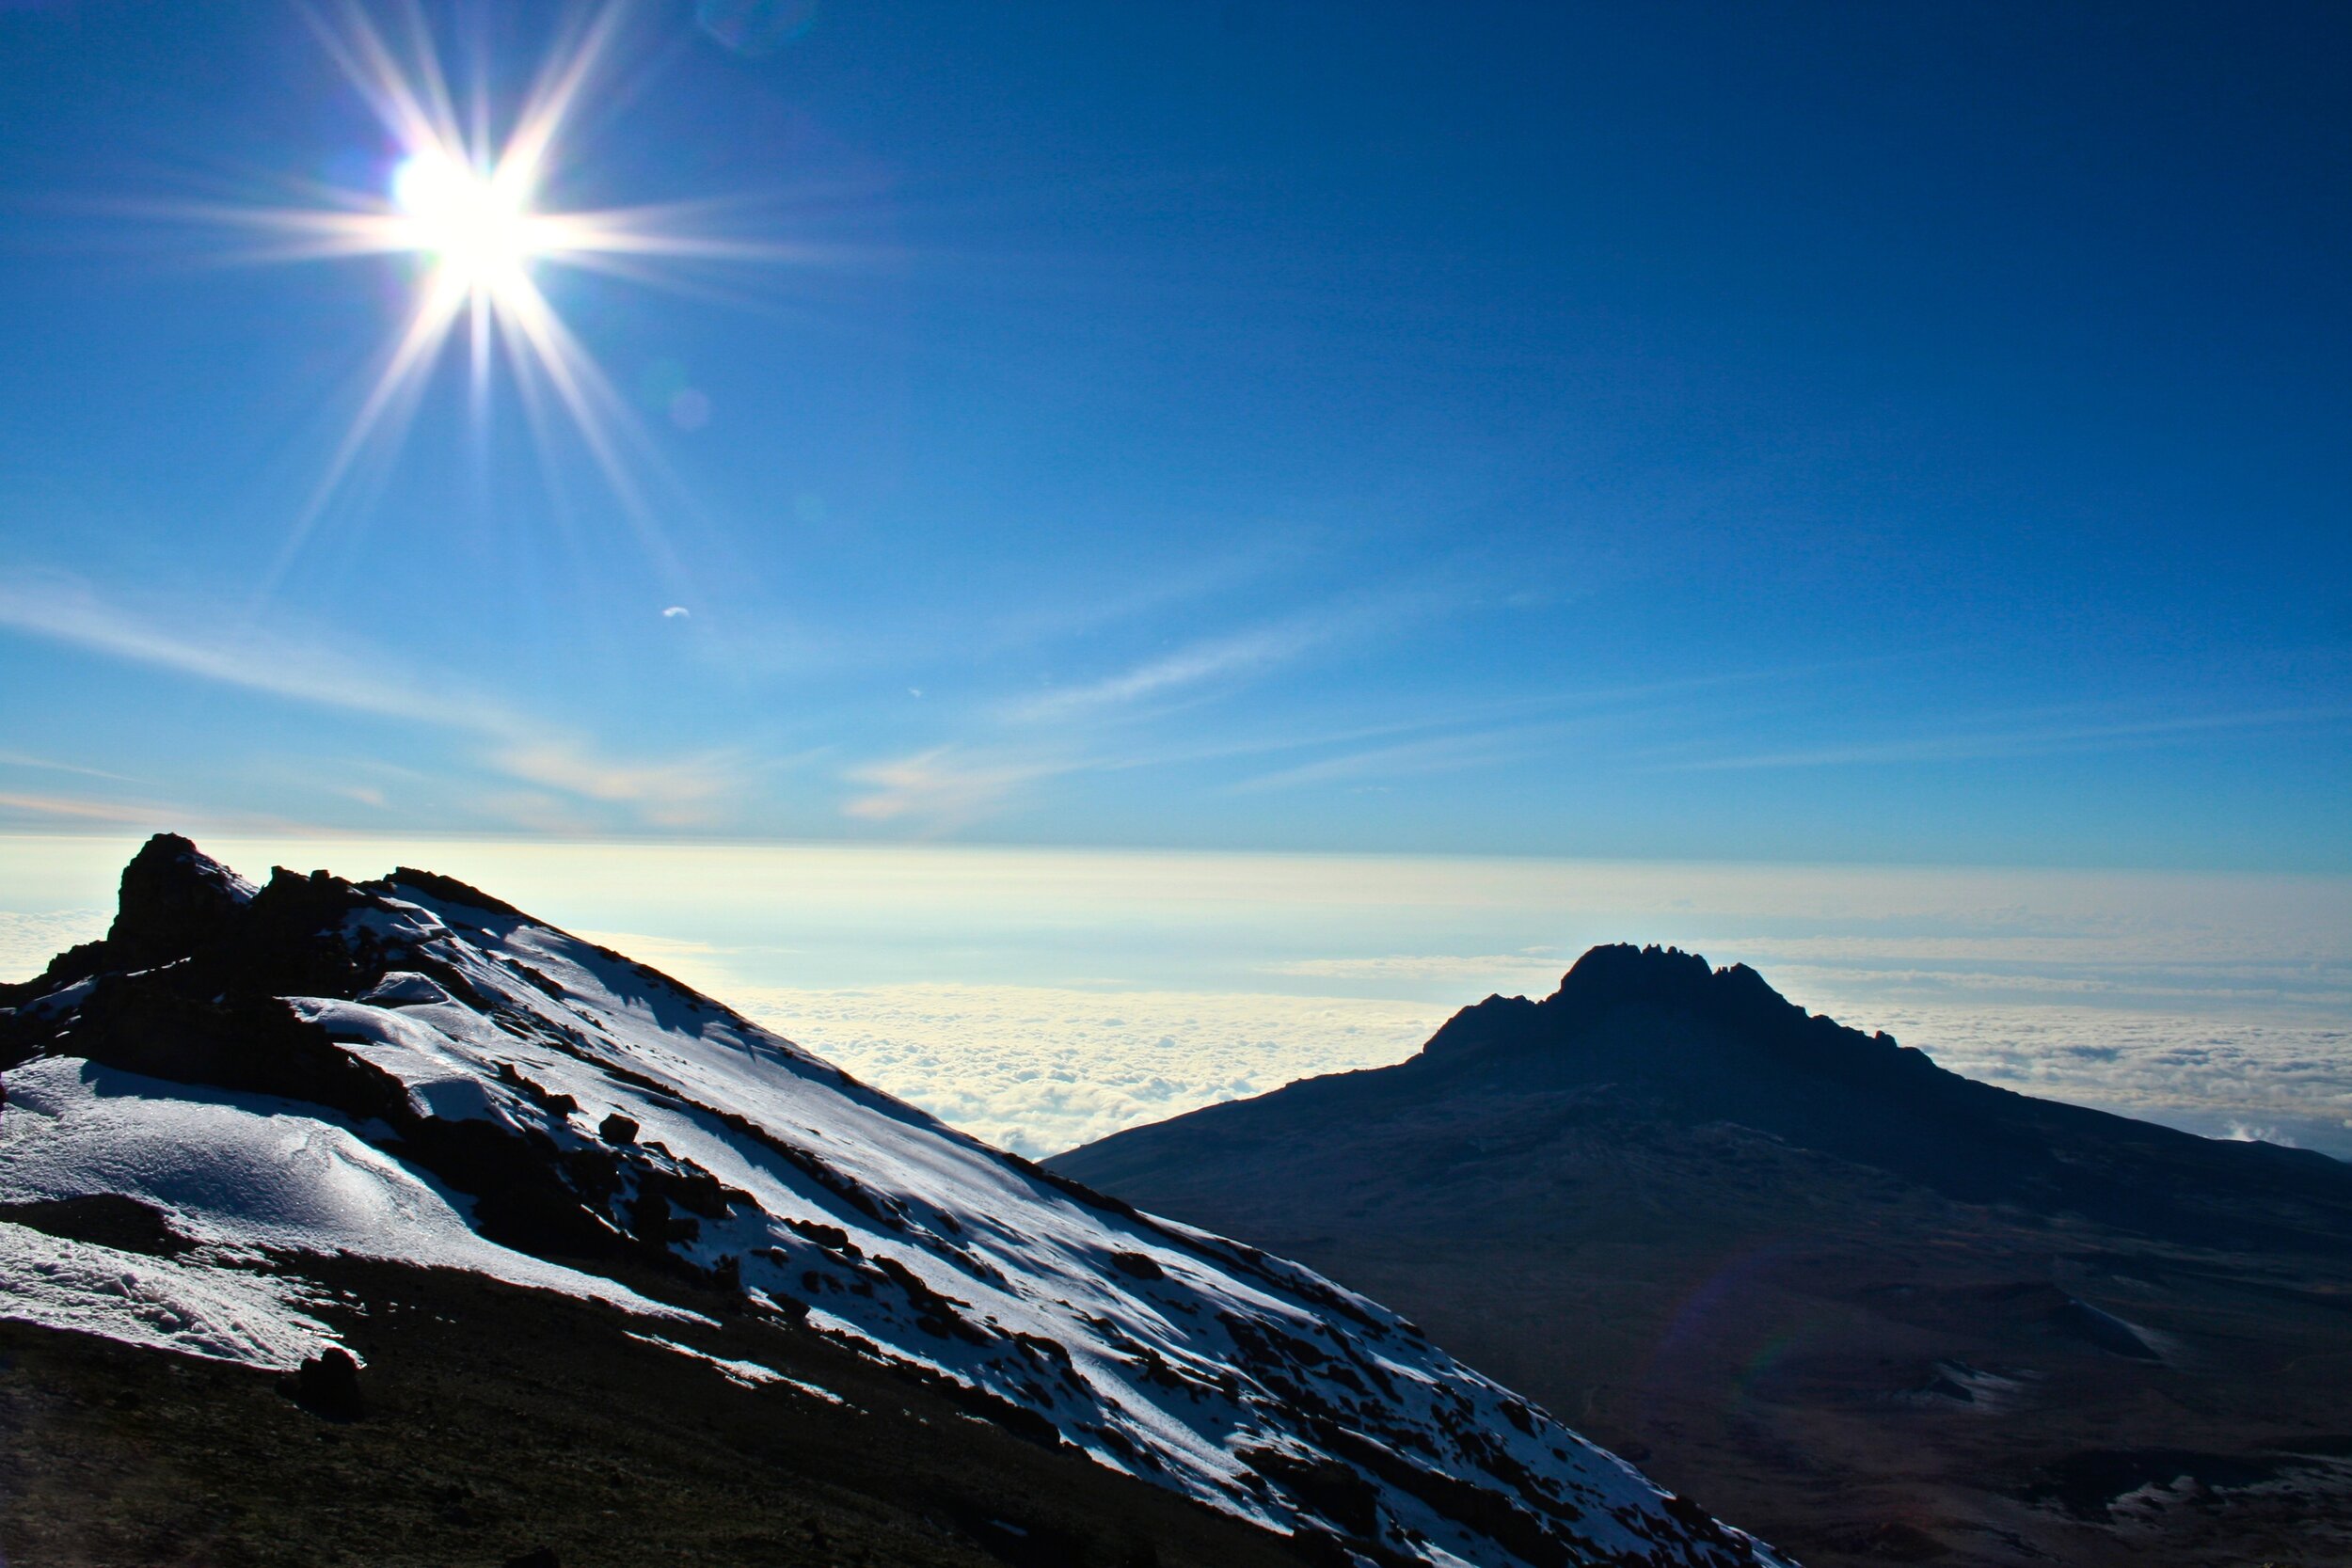 The summit rim of Kilimanjaro with Mount Mawenzi in the background.jpg